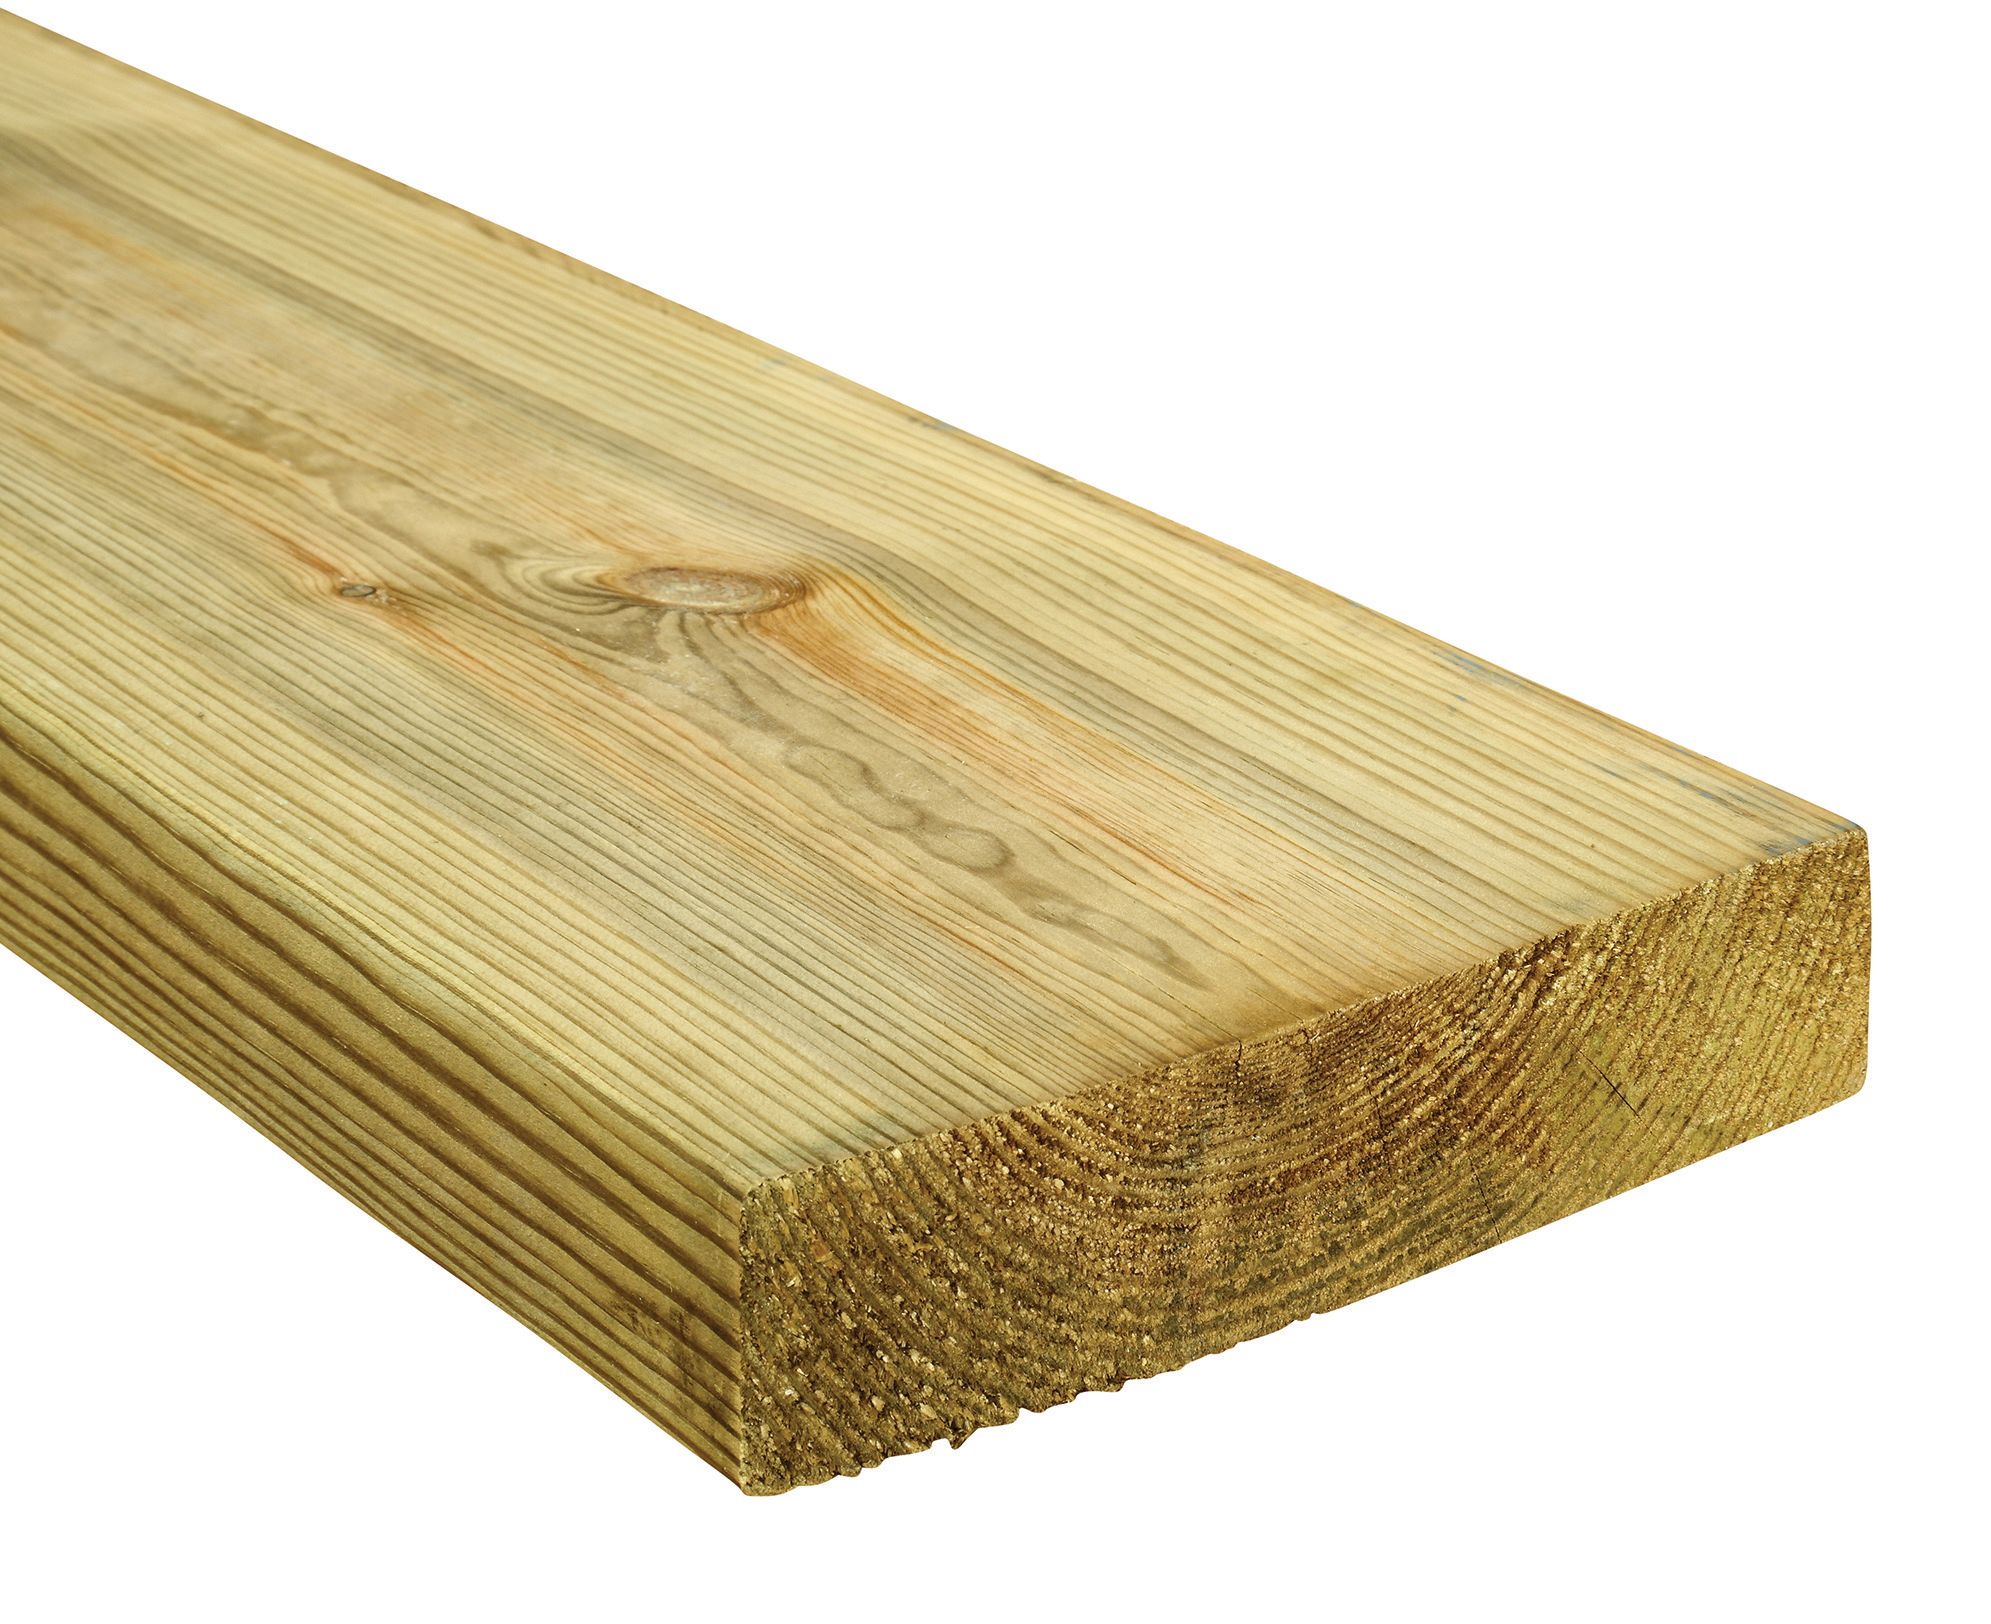 Image of Wickes Treated Kiln Dried C24 Regularised Timber - 45 x 195 x 4800mm